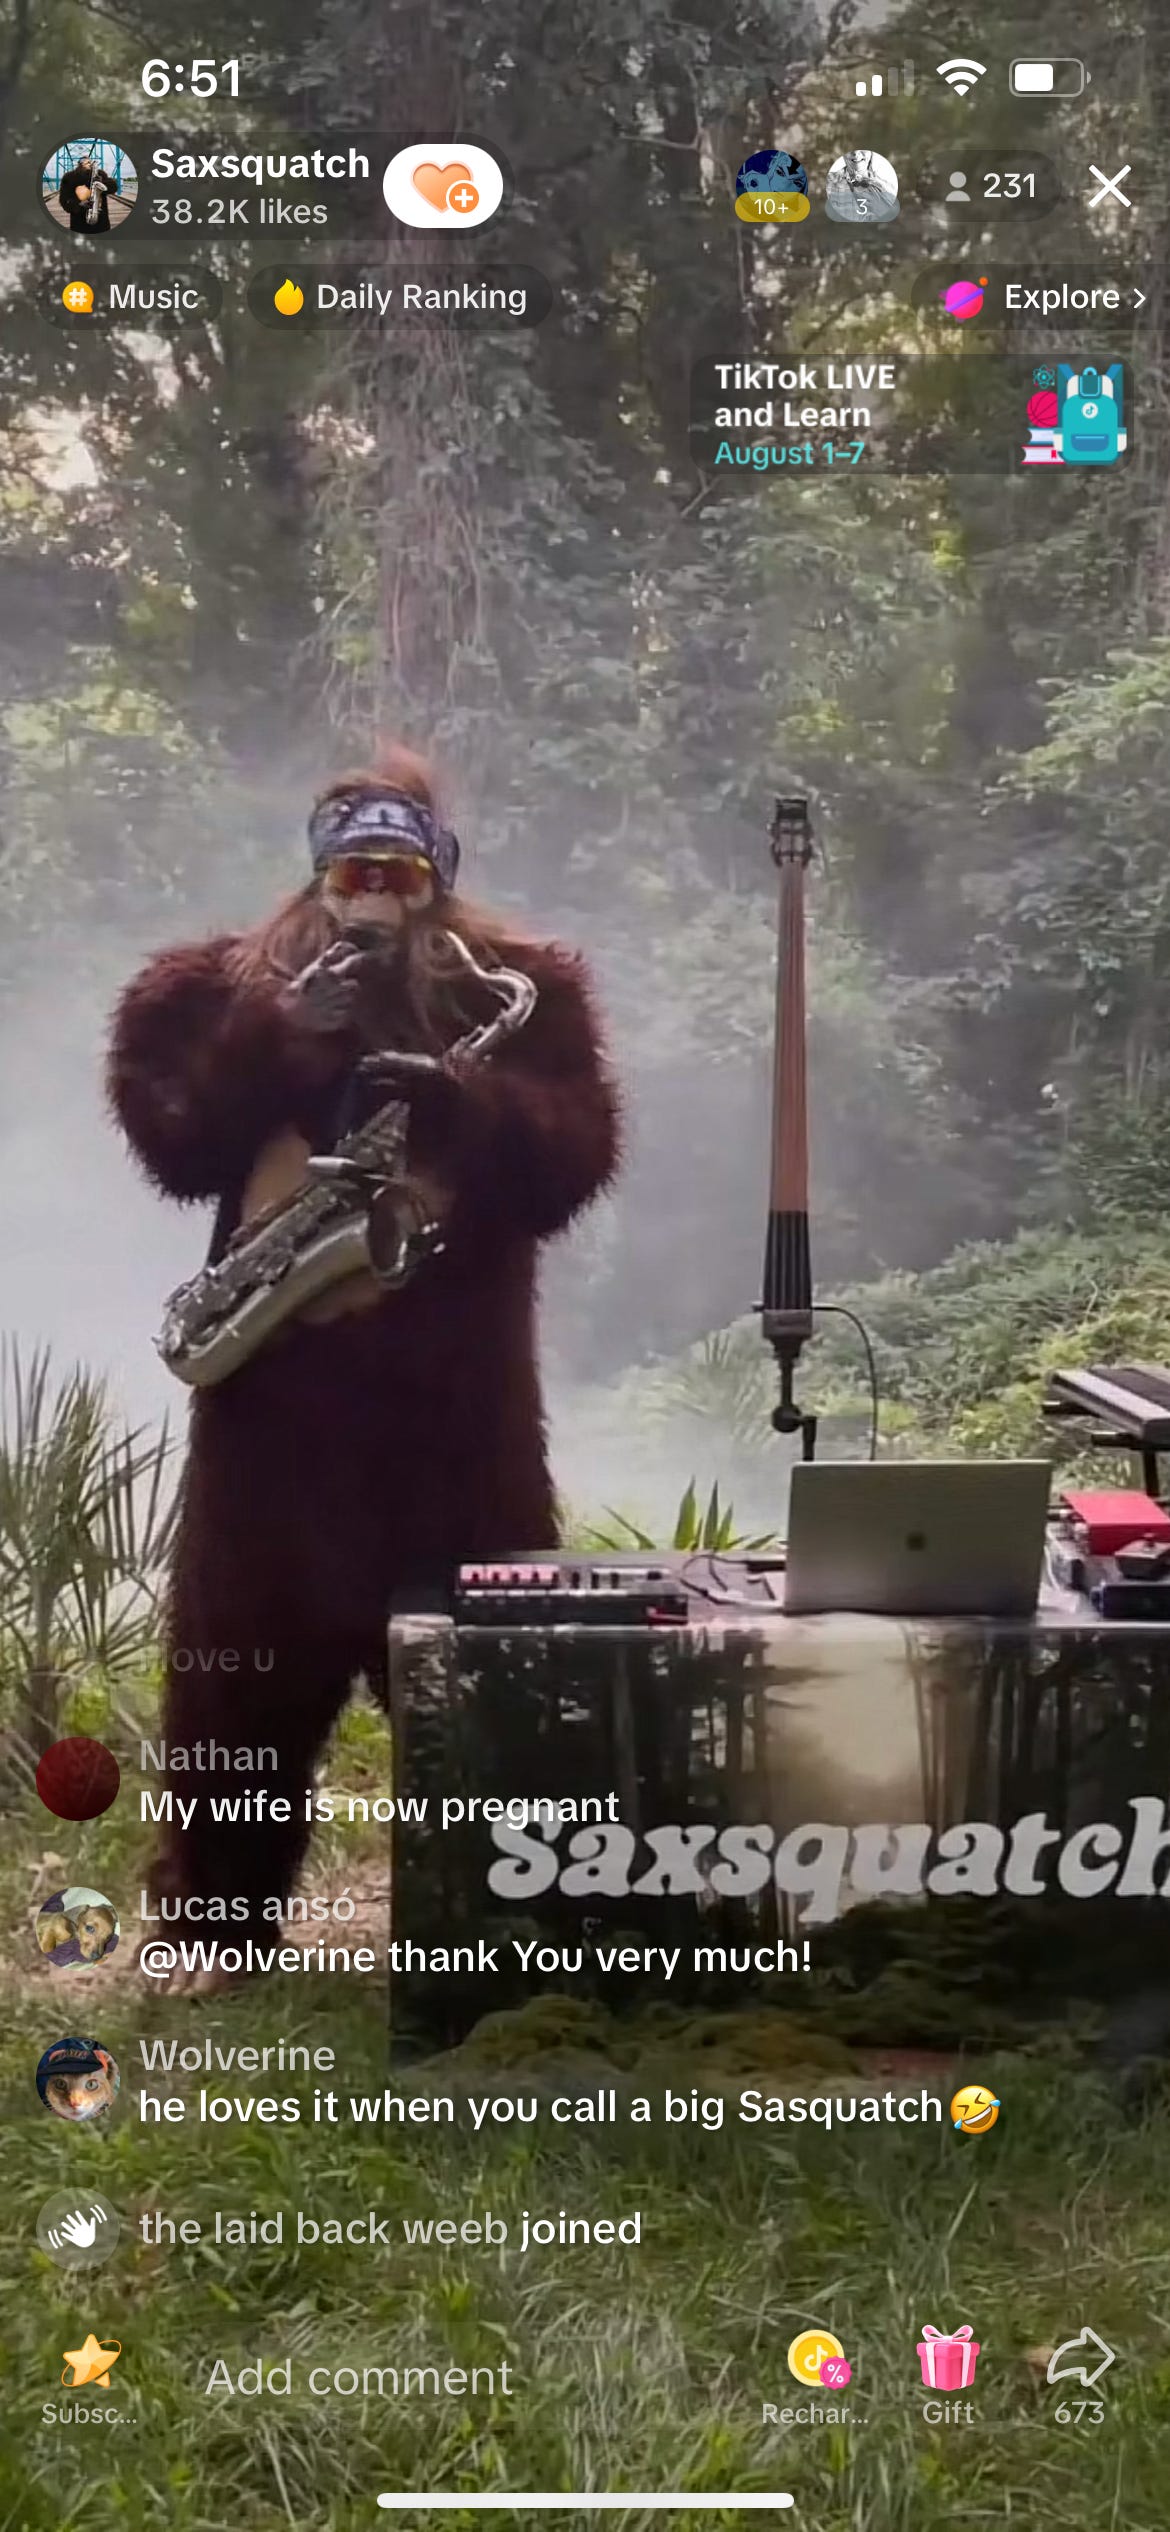 TikTok screenshot of a guy in a sasquatch costume in the forest standing next to a table with some DJ equipment and playing the sax.